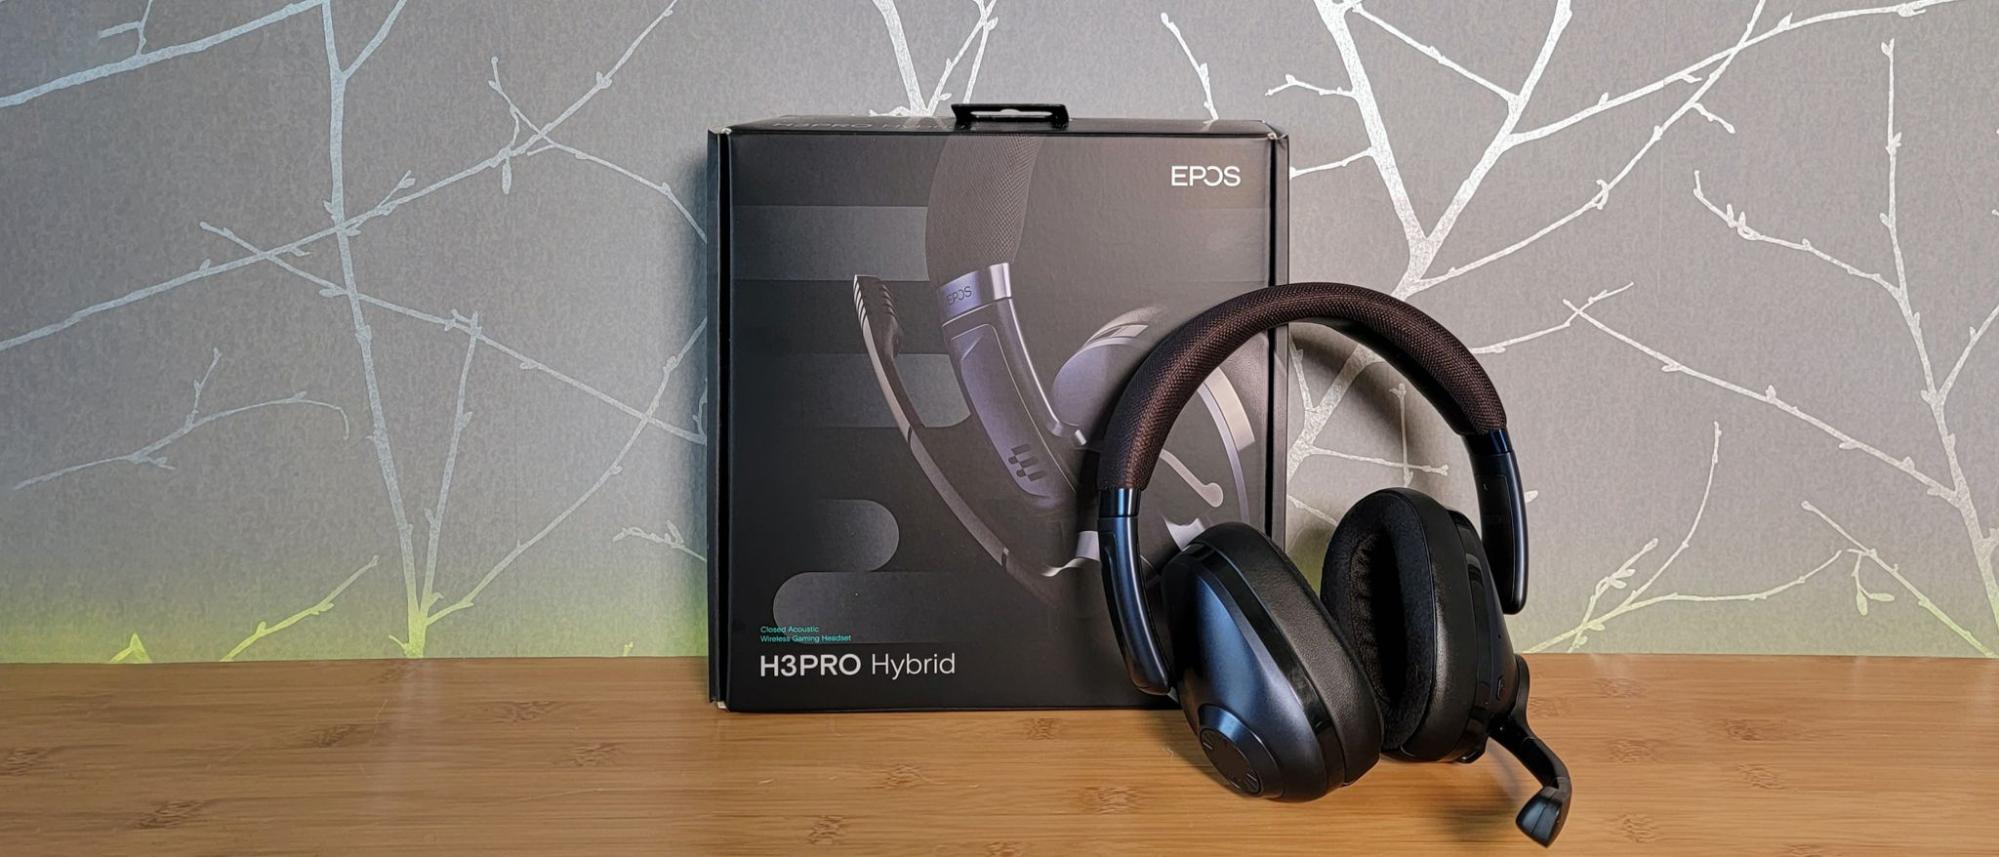 Epos H3Pro Hybrid Gaming Headset Review: Multi-Device Meets Noise